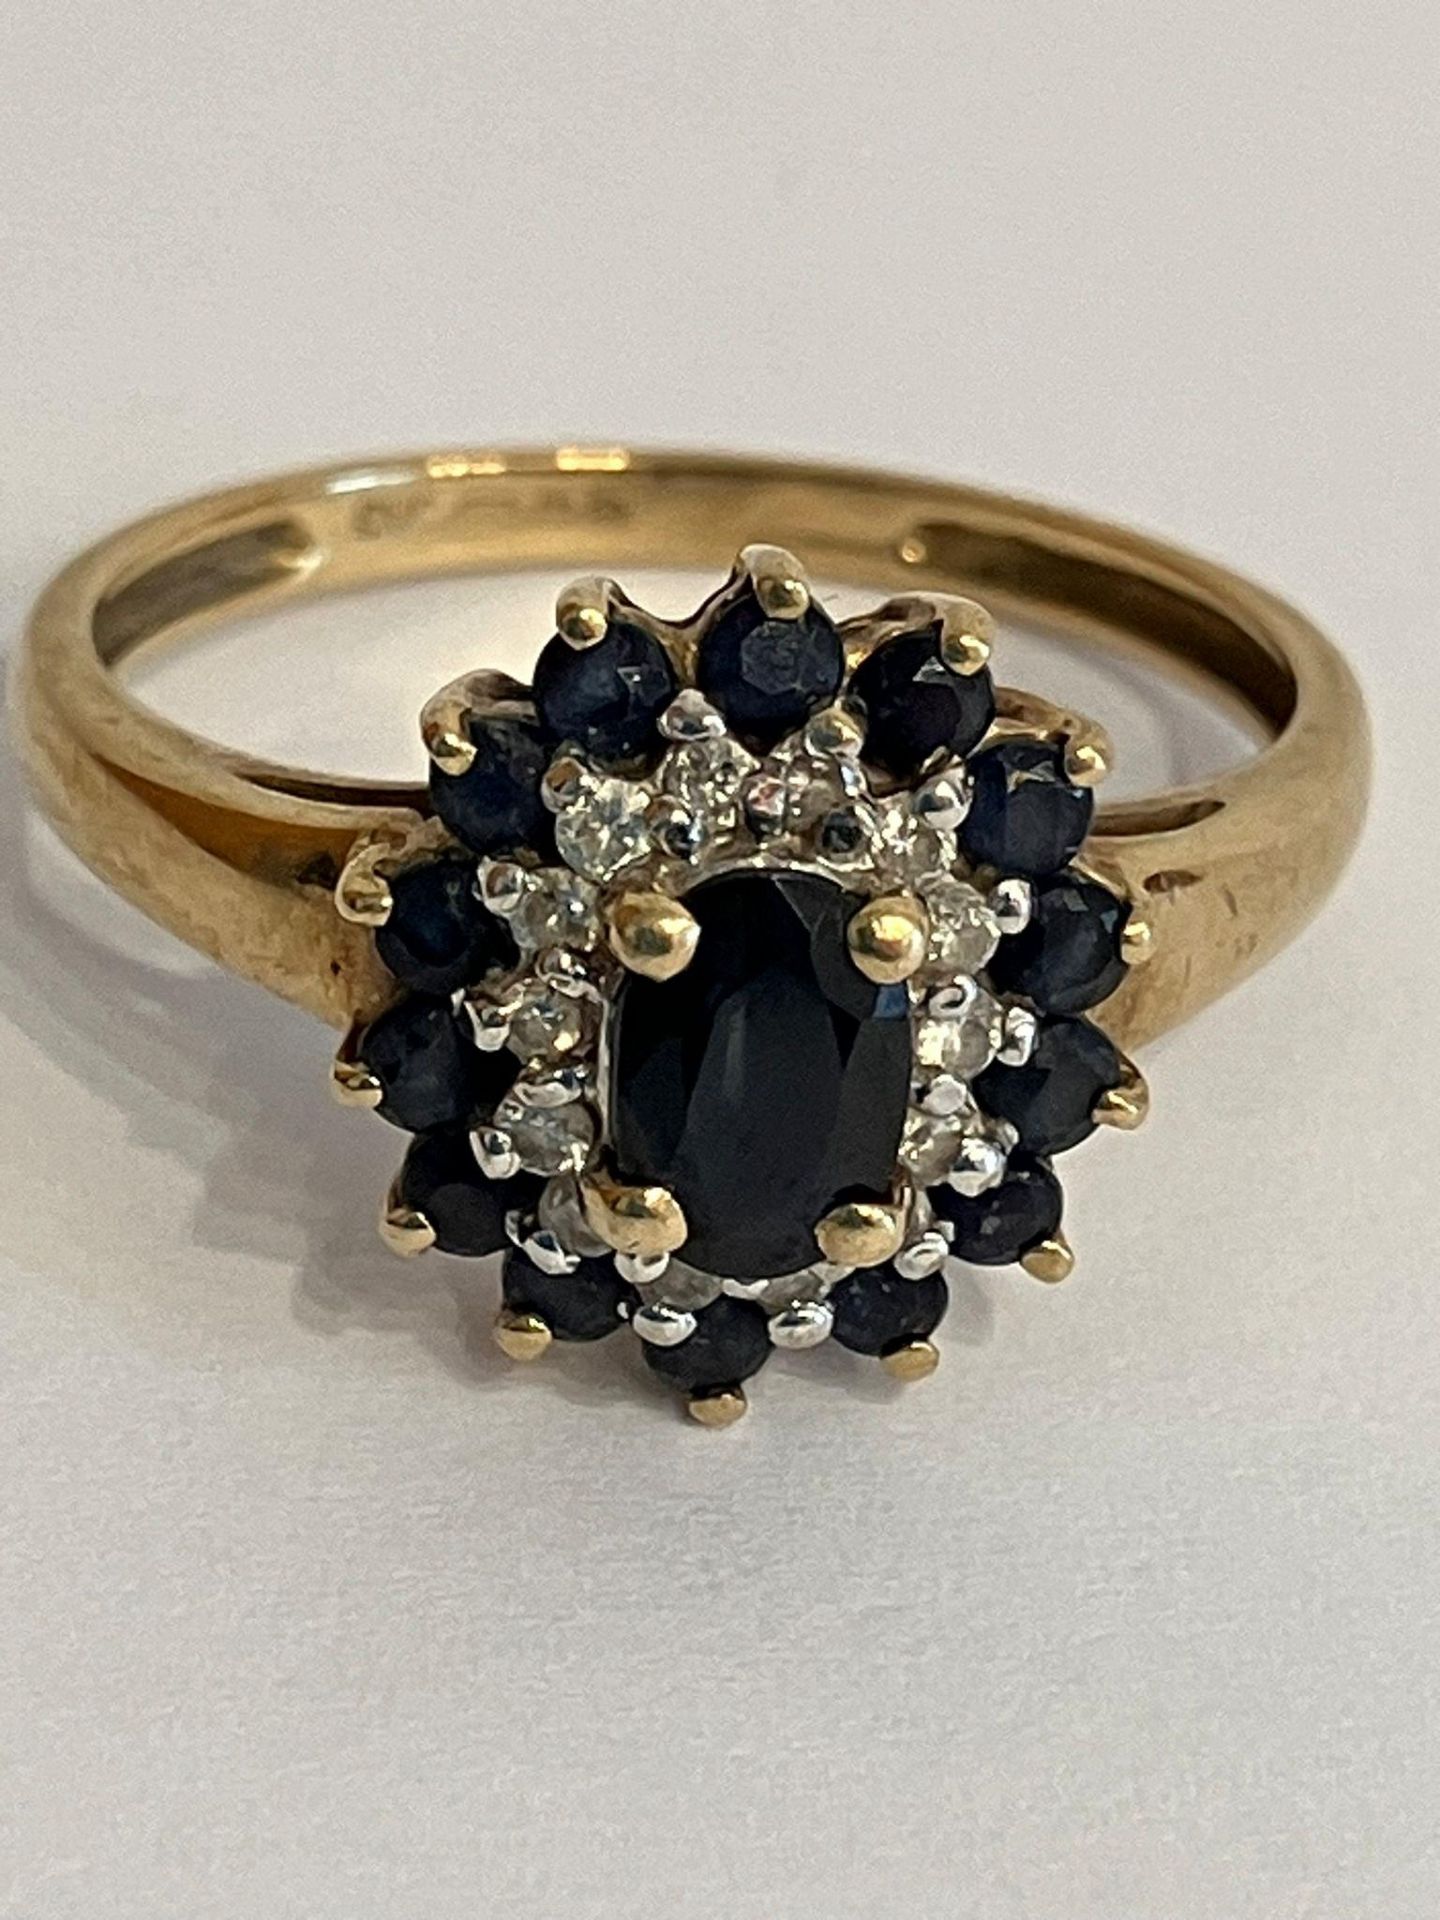 Stunning 9 carat GOLD ,SPINEL and DIAMOND RING. Consisting an oval cut BLACK SPINEL to centre with